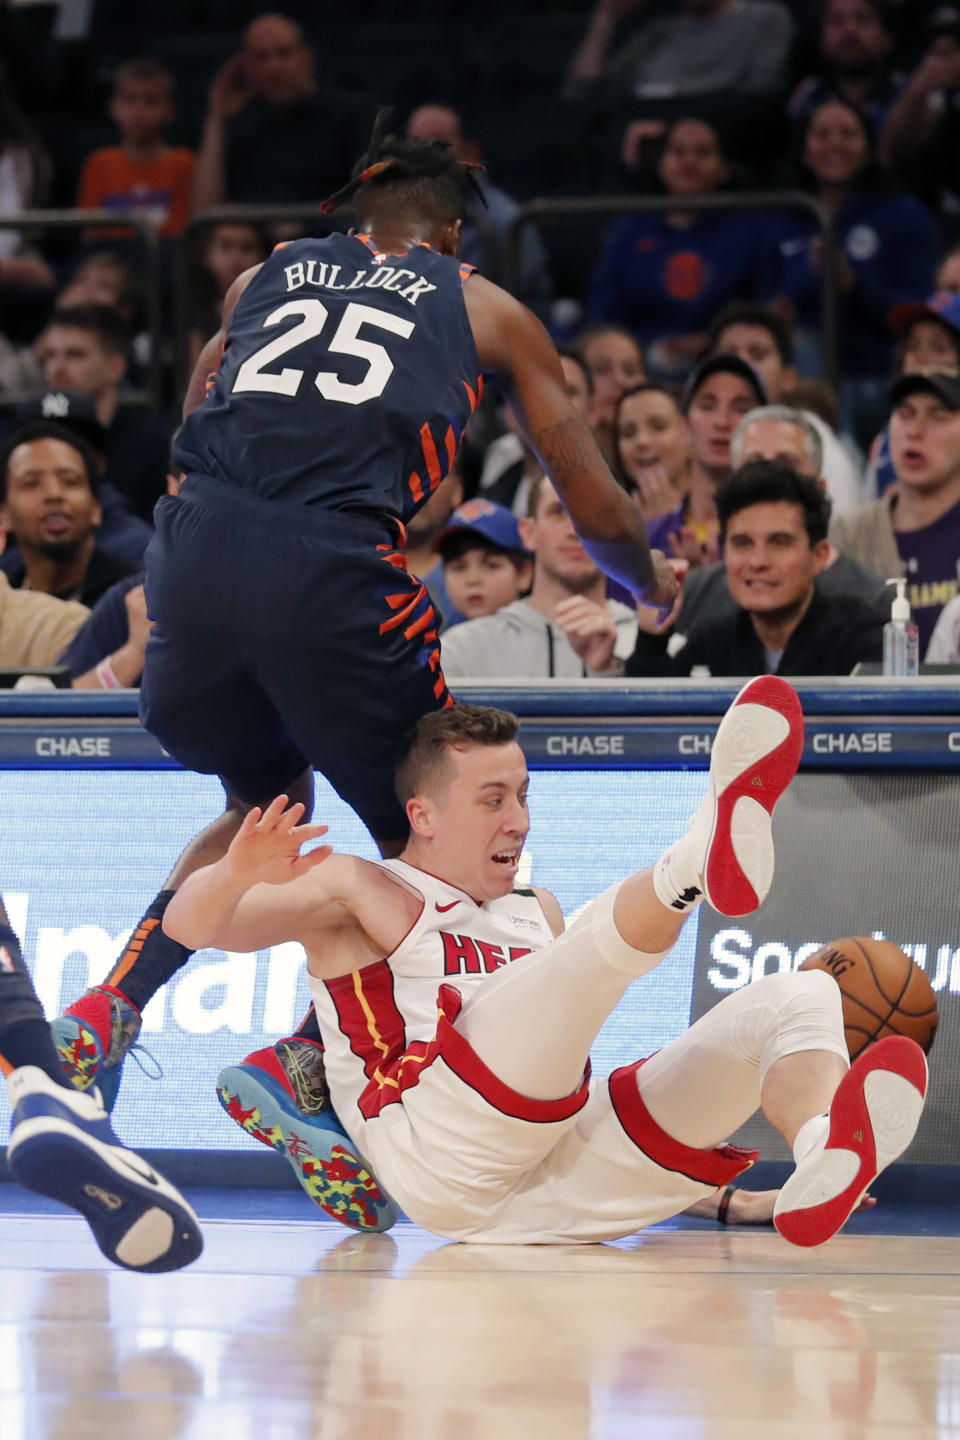 Miami Heat's Duncan Robinson, bottom, and New York Knicks' Reggie Bullock (25) dive after a loose ball during the second half of the NBA basketball game, Sunday, Jan. 12, 2020, in New York. The Knicks defeated the Heat 124-121. (AP Photo/Seth Wenig)